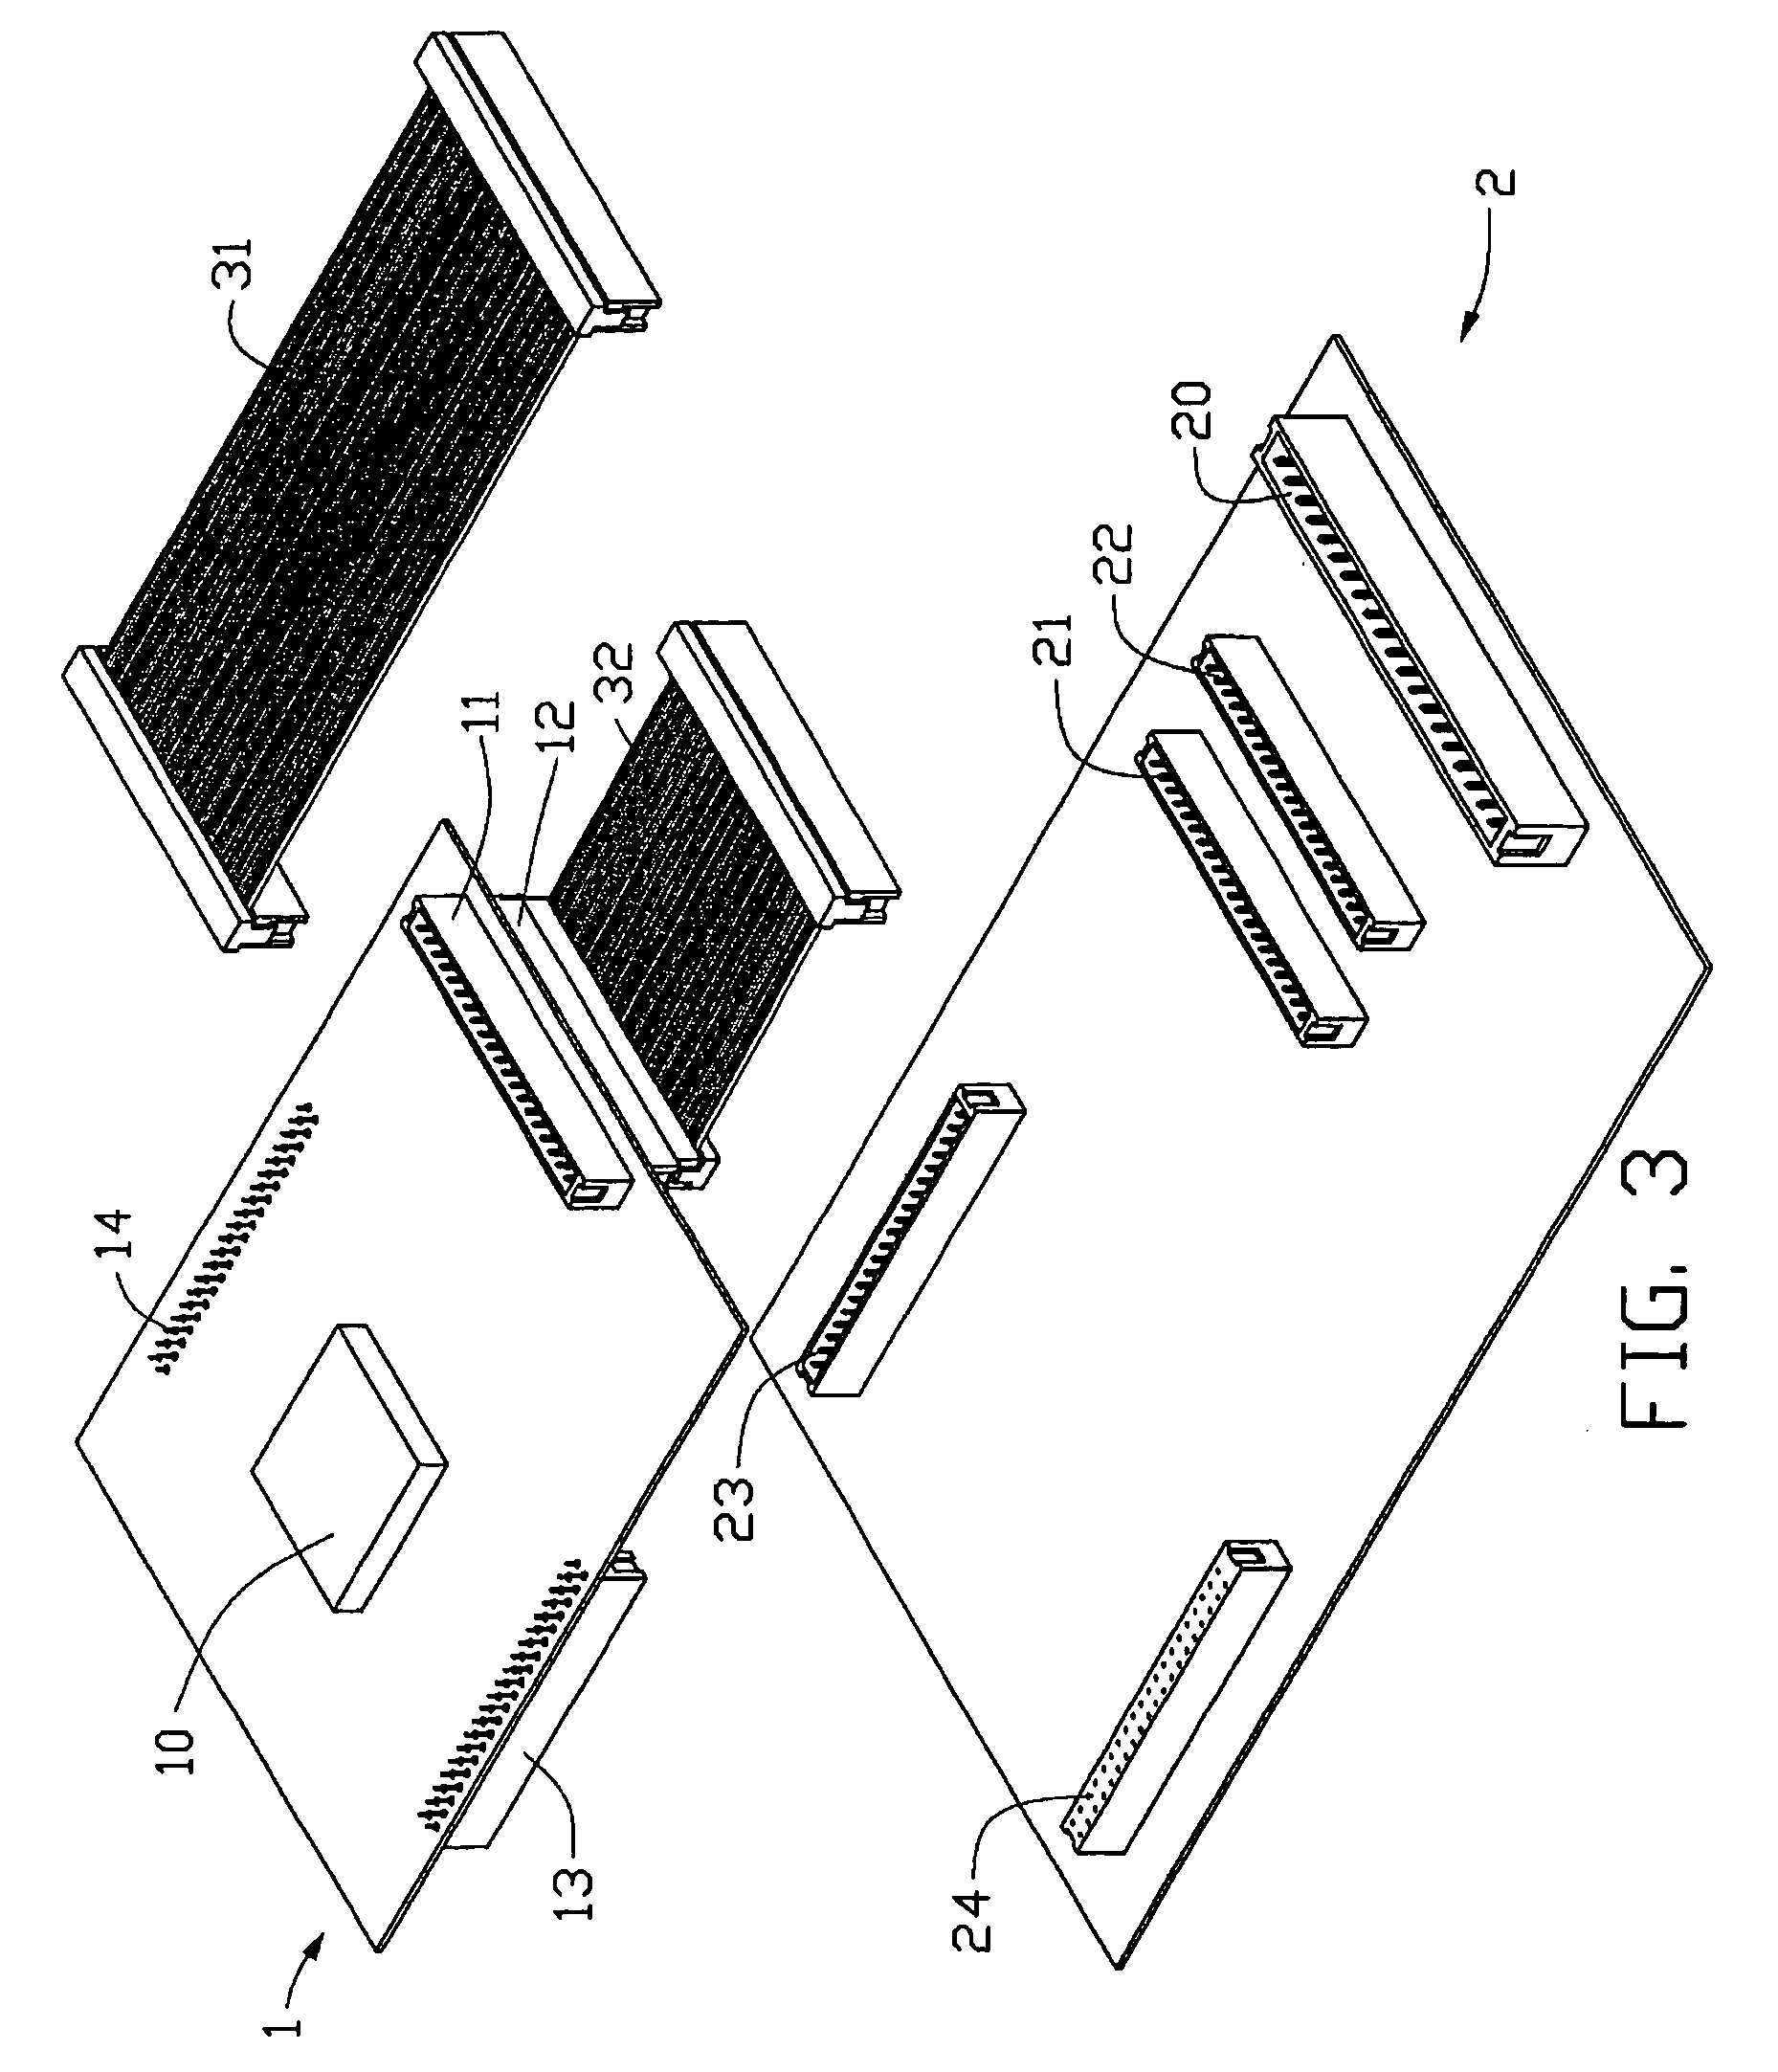 Expansible interface for modularized printed circuit boards